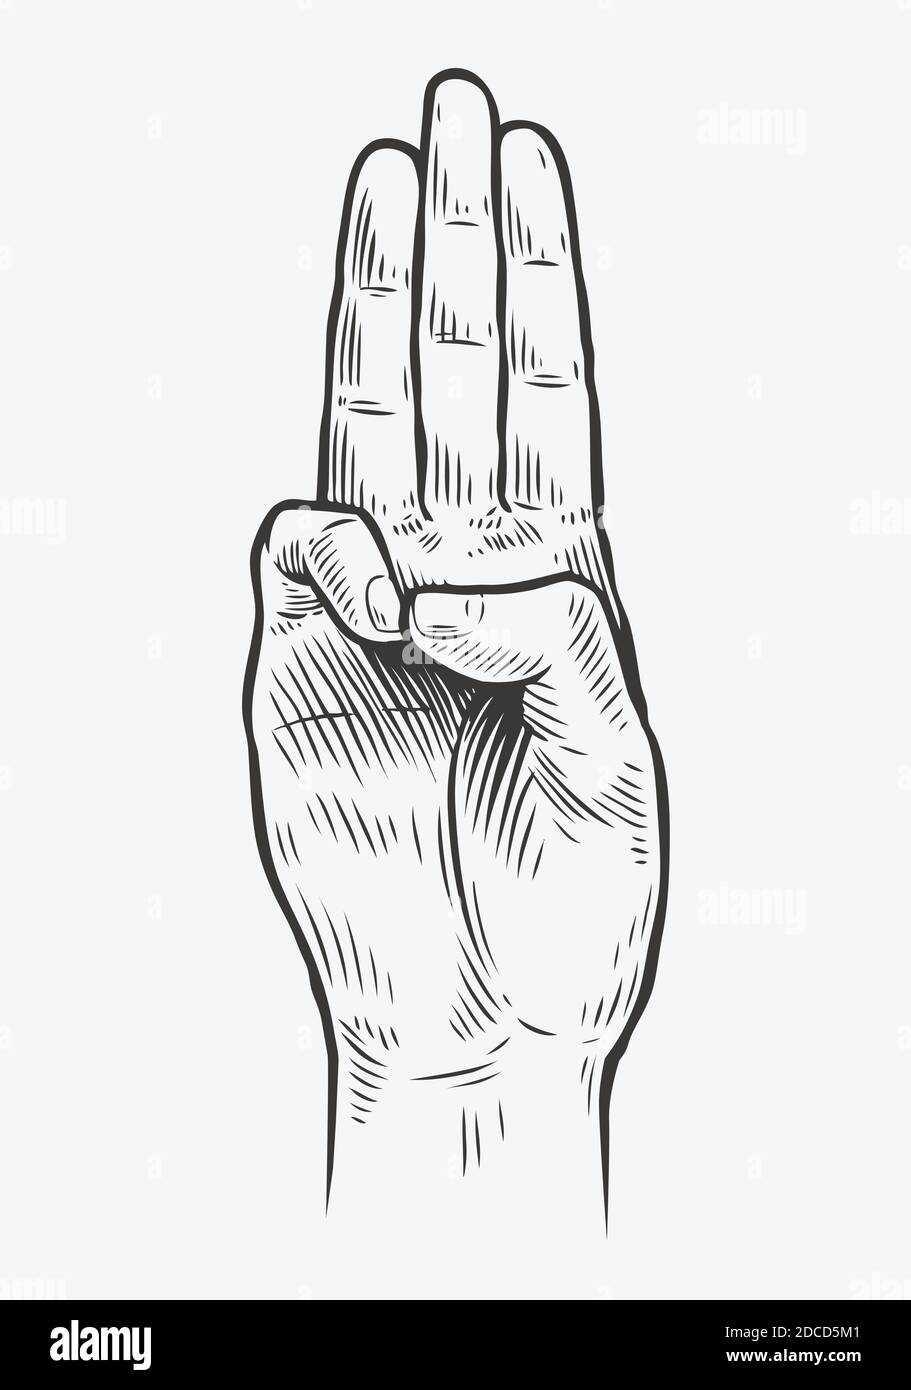 Scout symbol hand gesture. Scouting sketch vector illustration Stock Vector